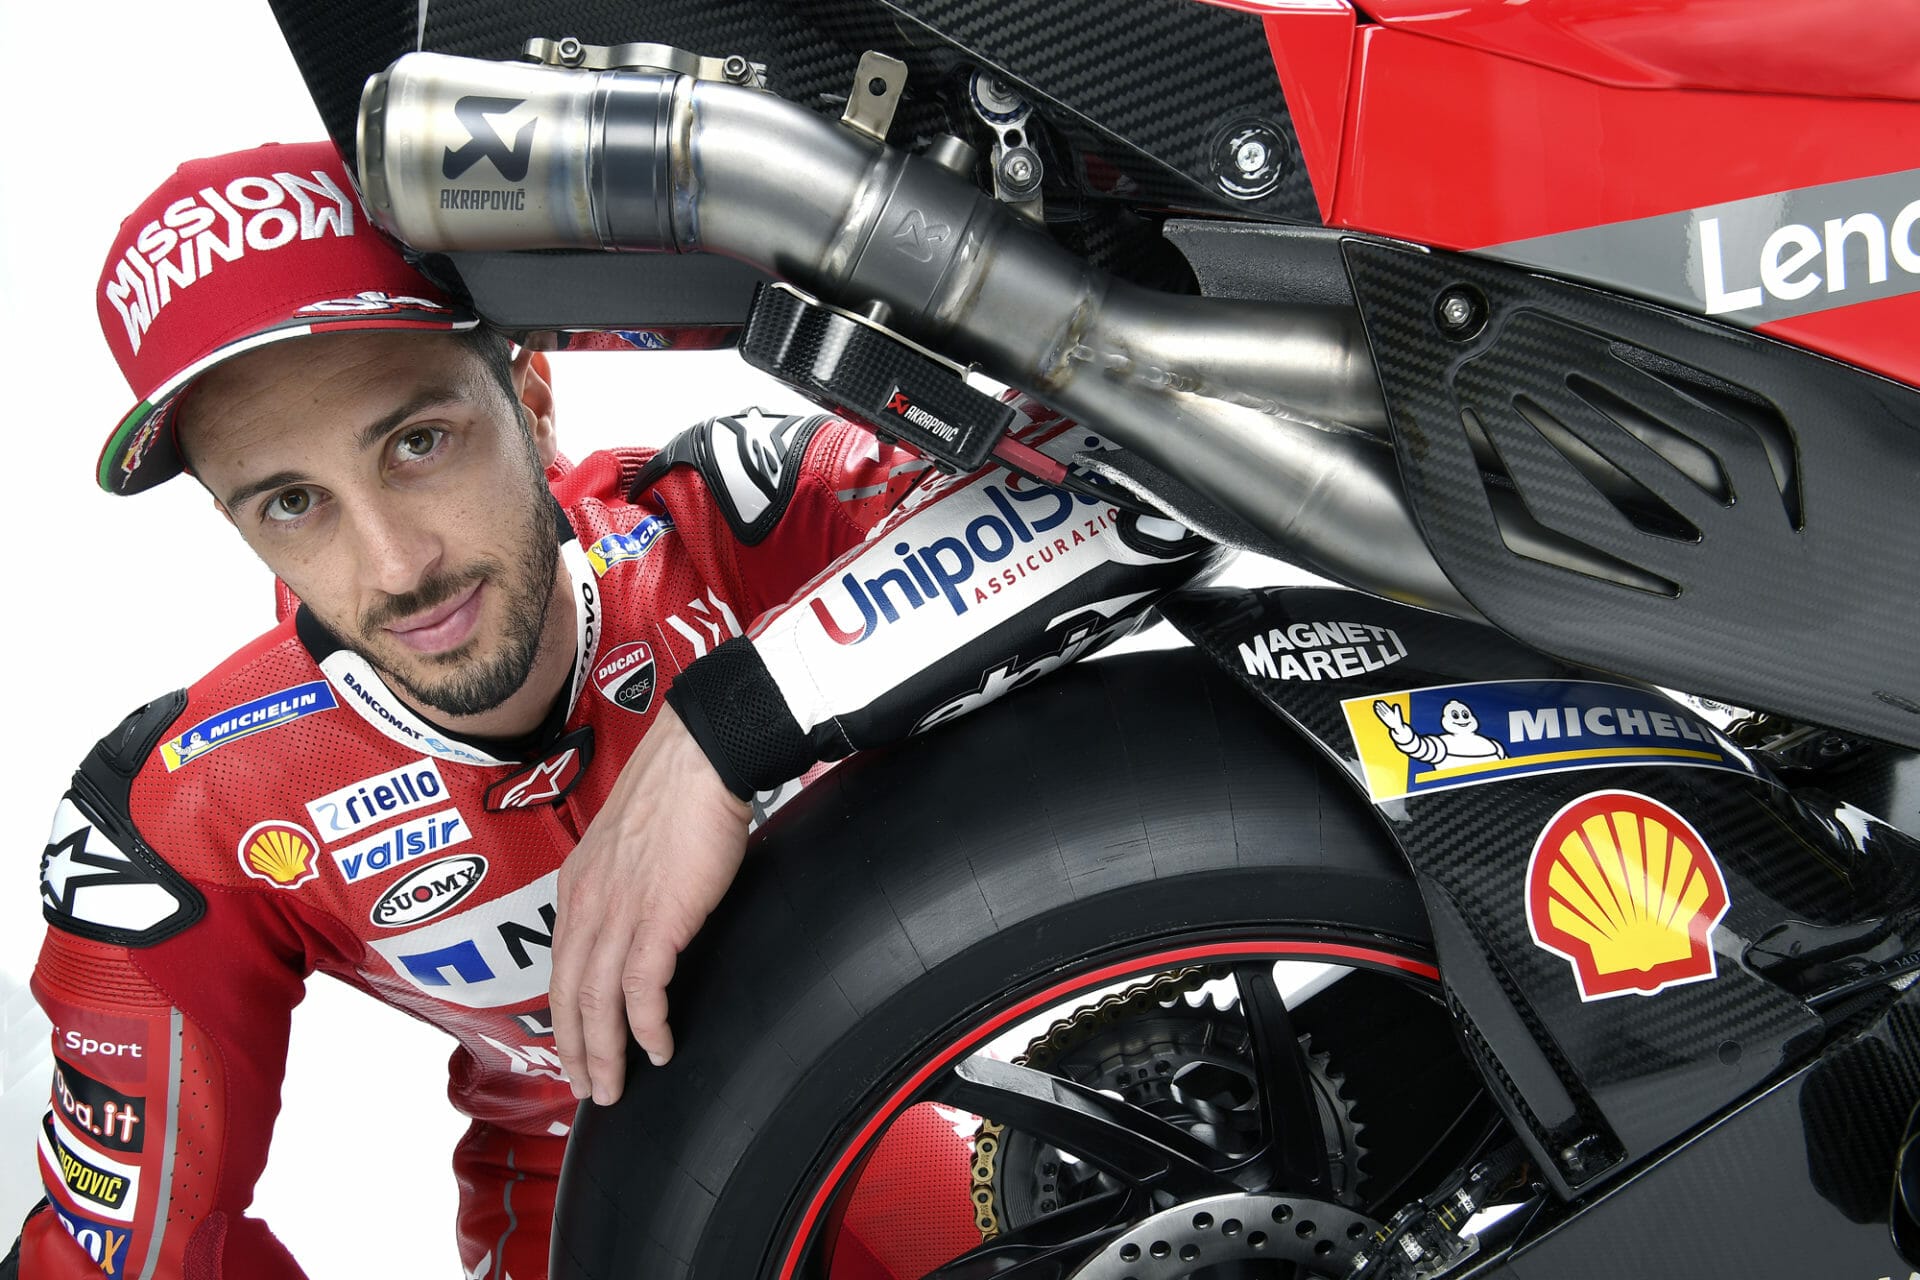 MotoGP: Dovizioso and Ducati separate at end of season
- also in the App MOTORCYCLE NEWS